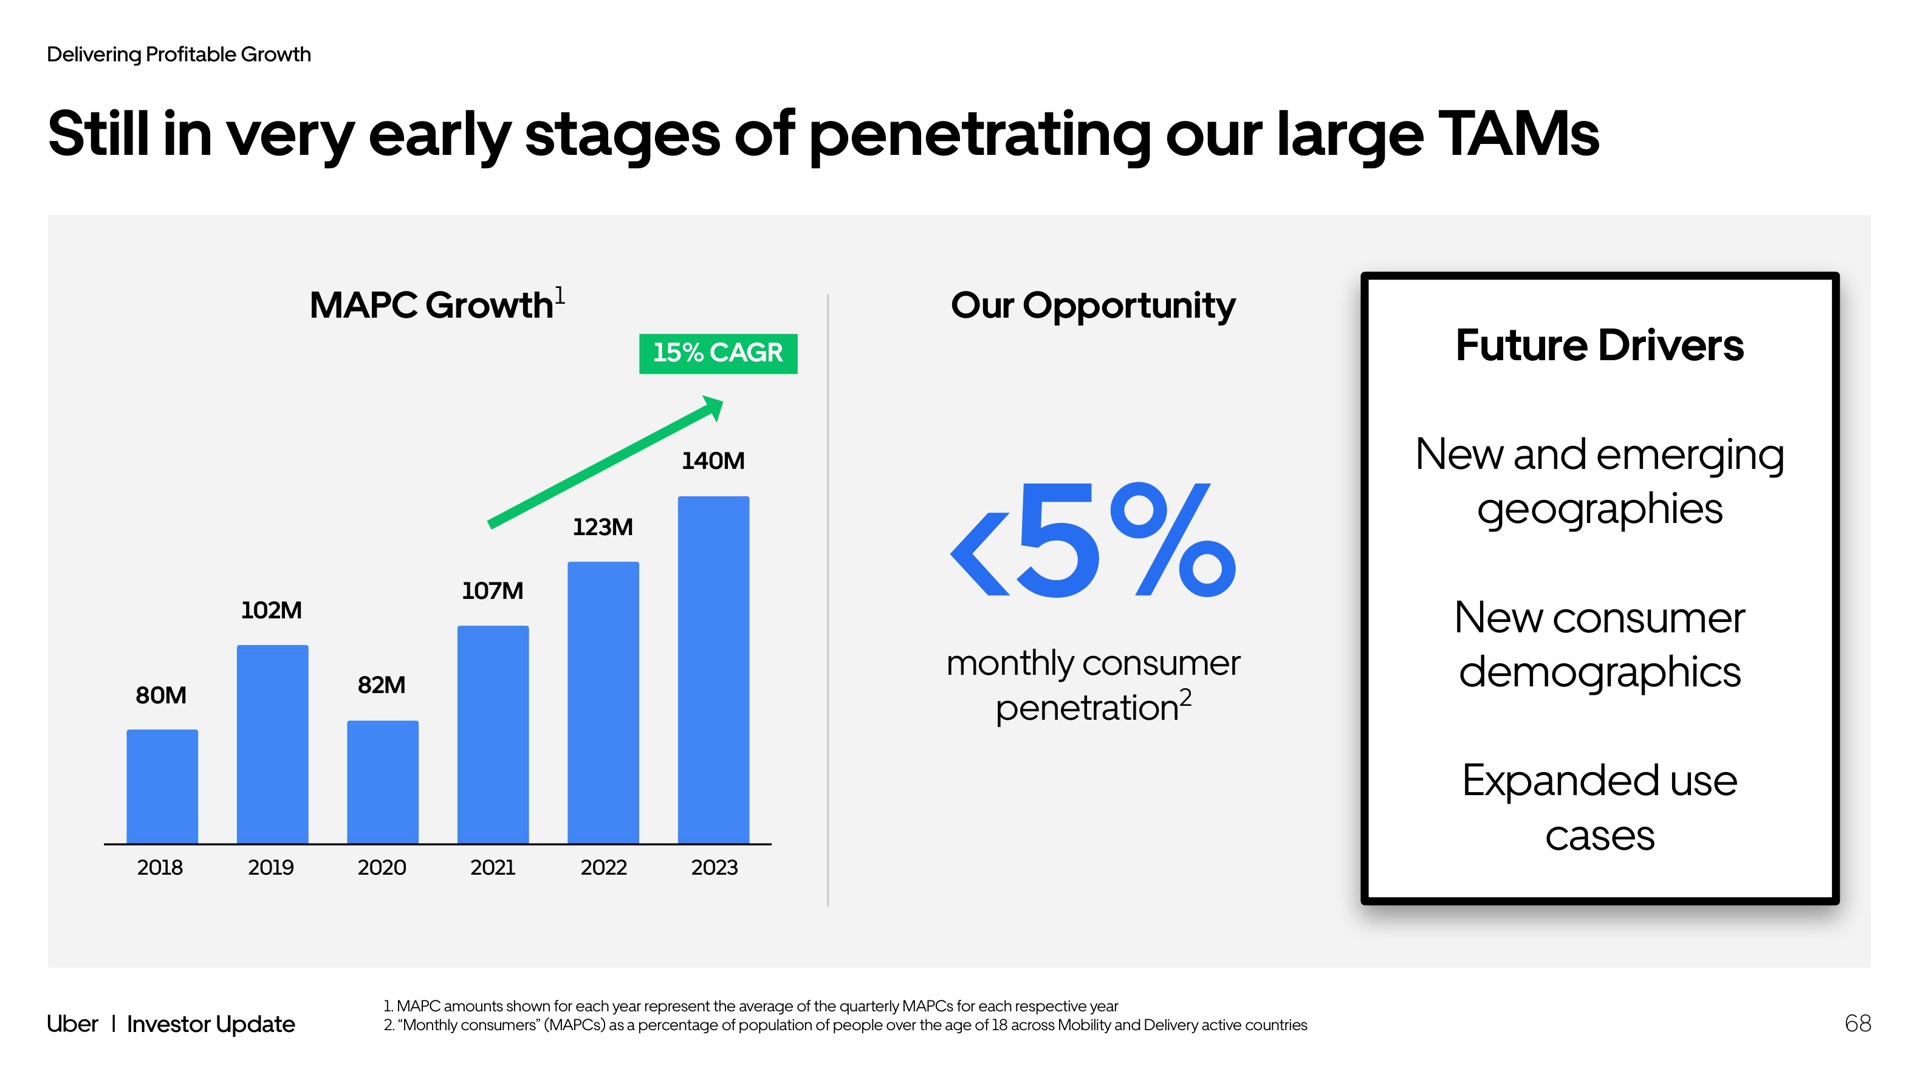 still in very early stages of penetrating our large tams growth our opportunity monthly consumer penetration future drivers new and emerging geographies new consumer demographics expanded use cases | Uber